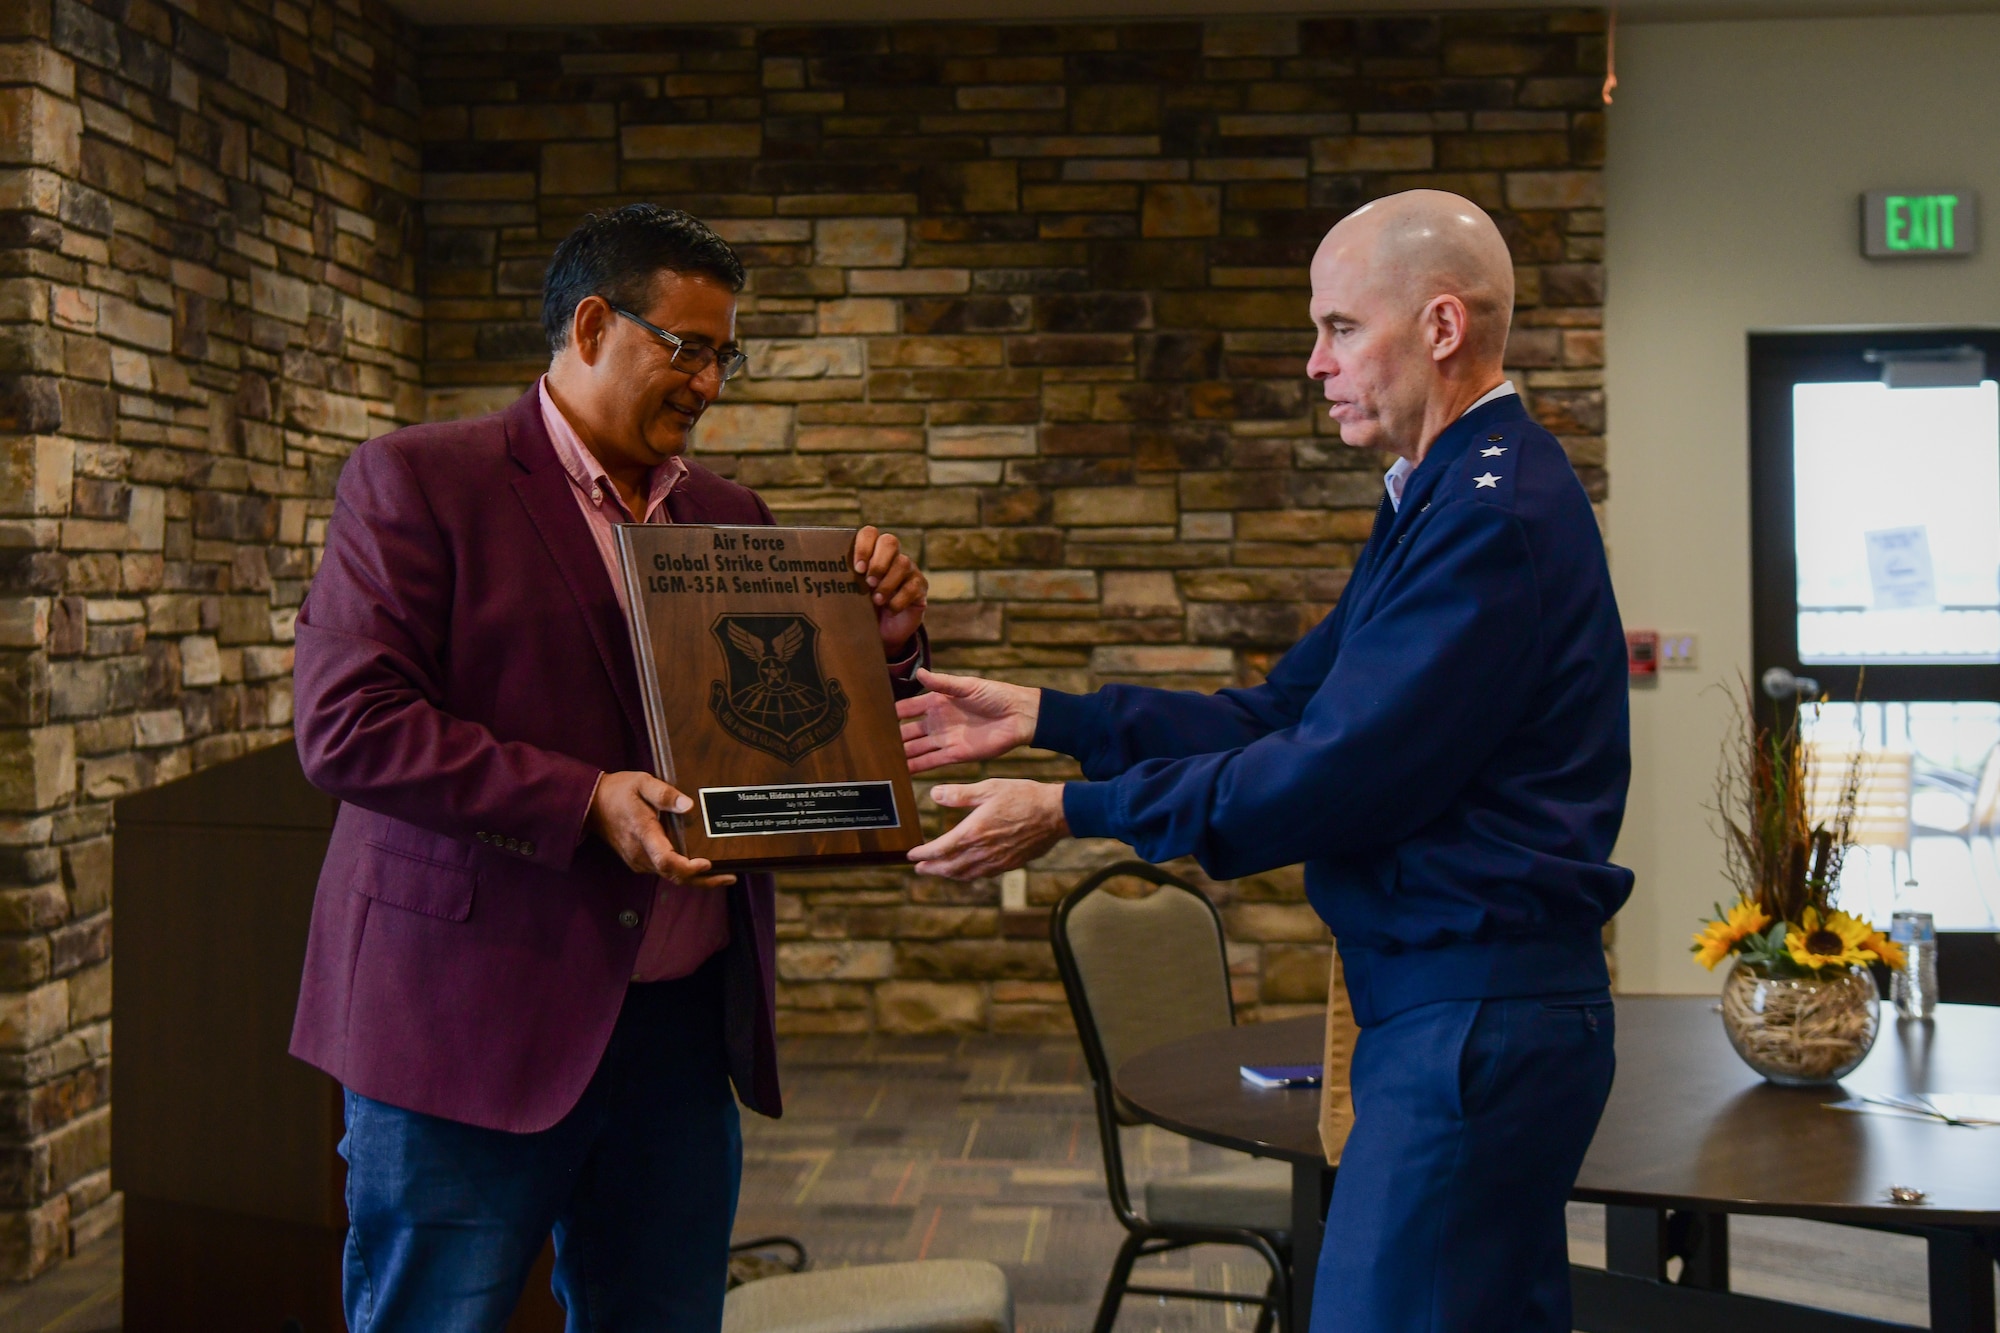 Maj Gen. Michael Lutton, Twentieth Air Force commander and Three Affiliated Tribes Chairman Mark Fox exchange gifts at Fort Berthold Reservation New Town, N.D. July 19, 2022.